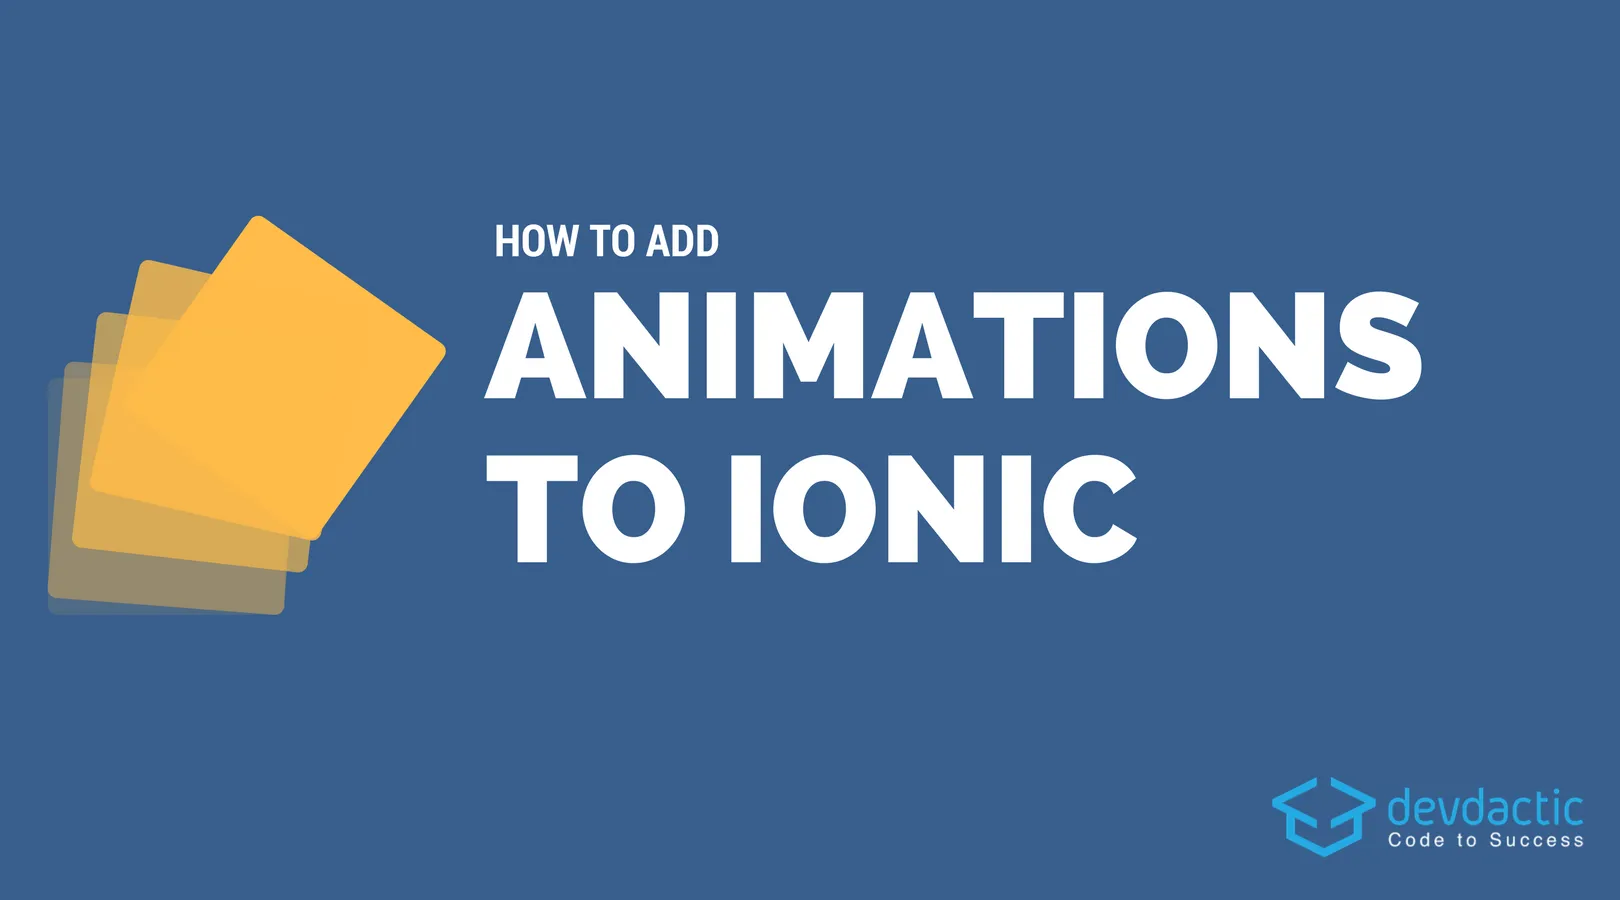 How to Add Ionic Animations Using Angular (2 Different Ways!) | Devdactic